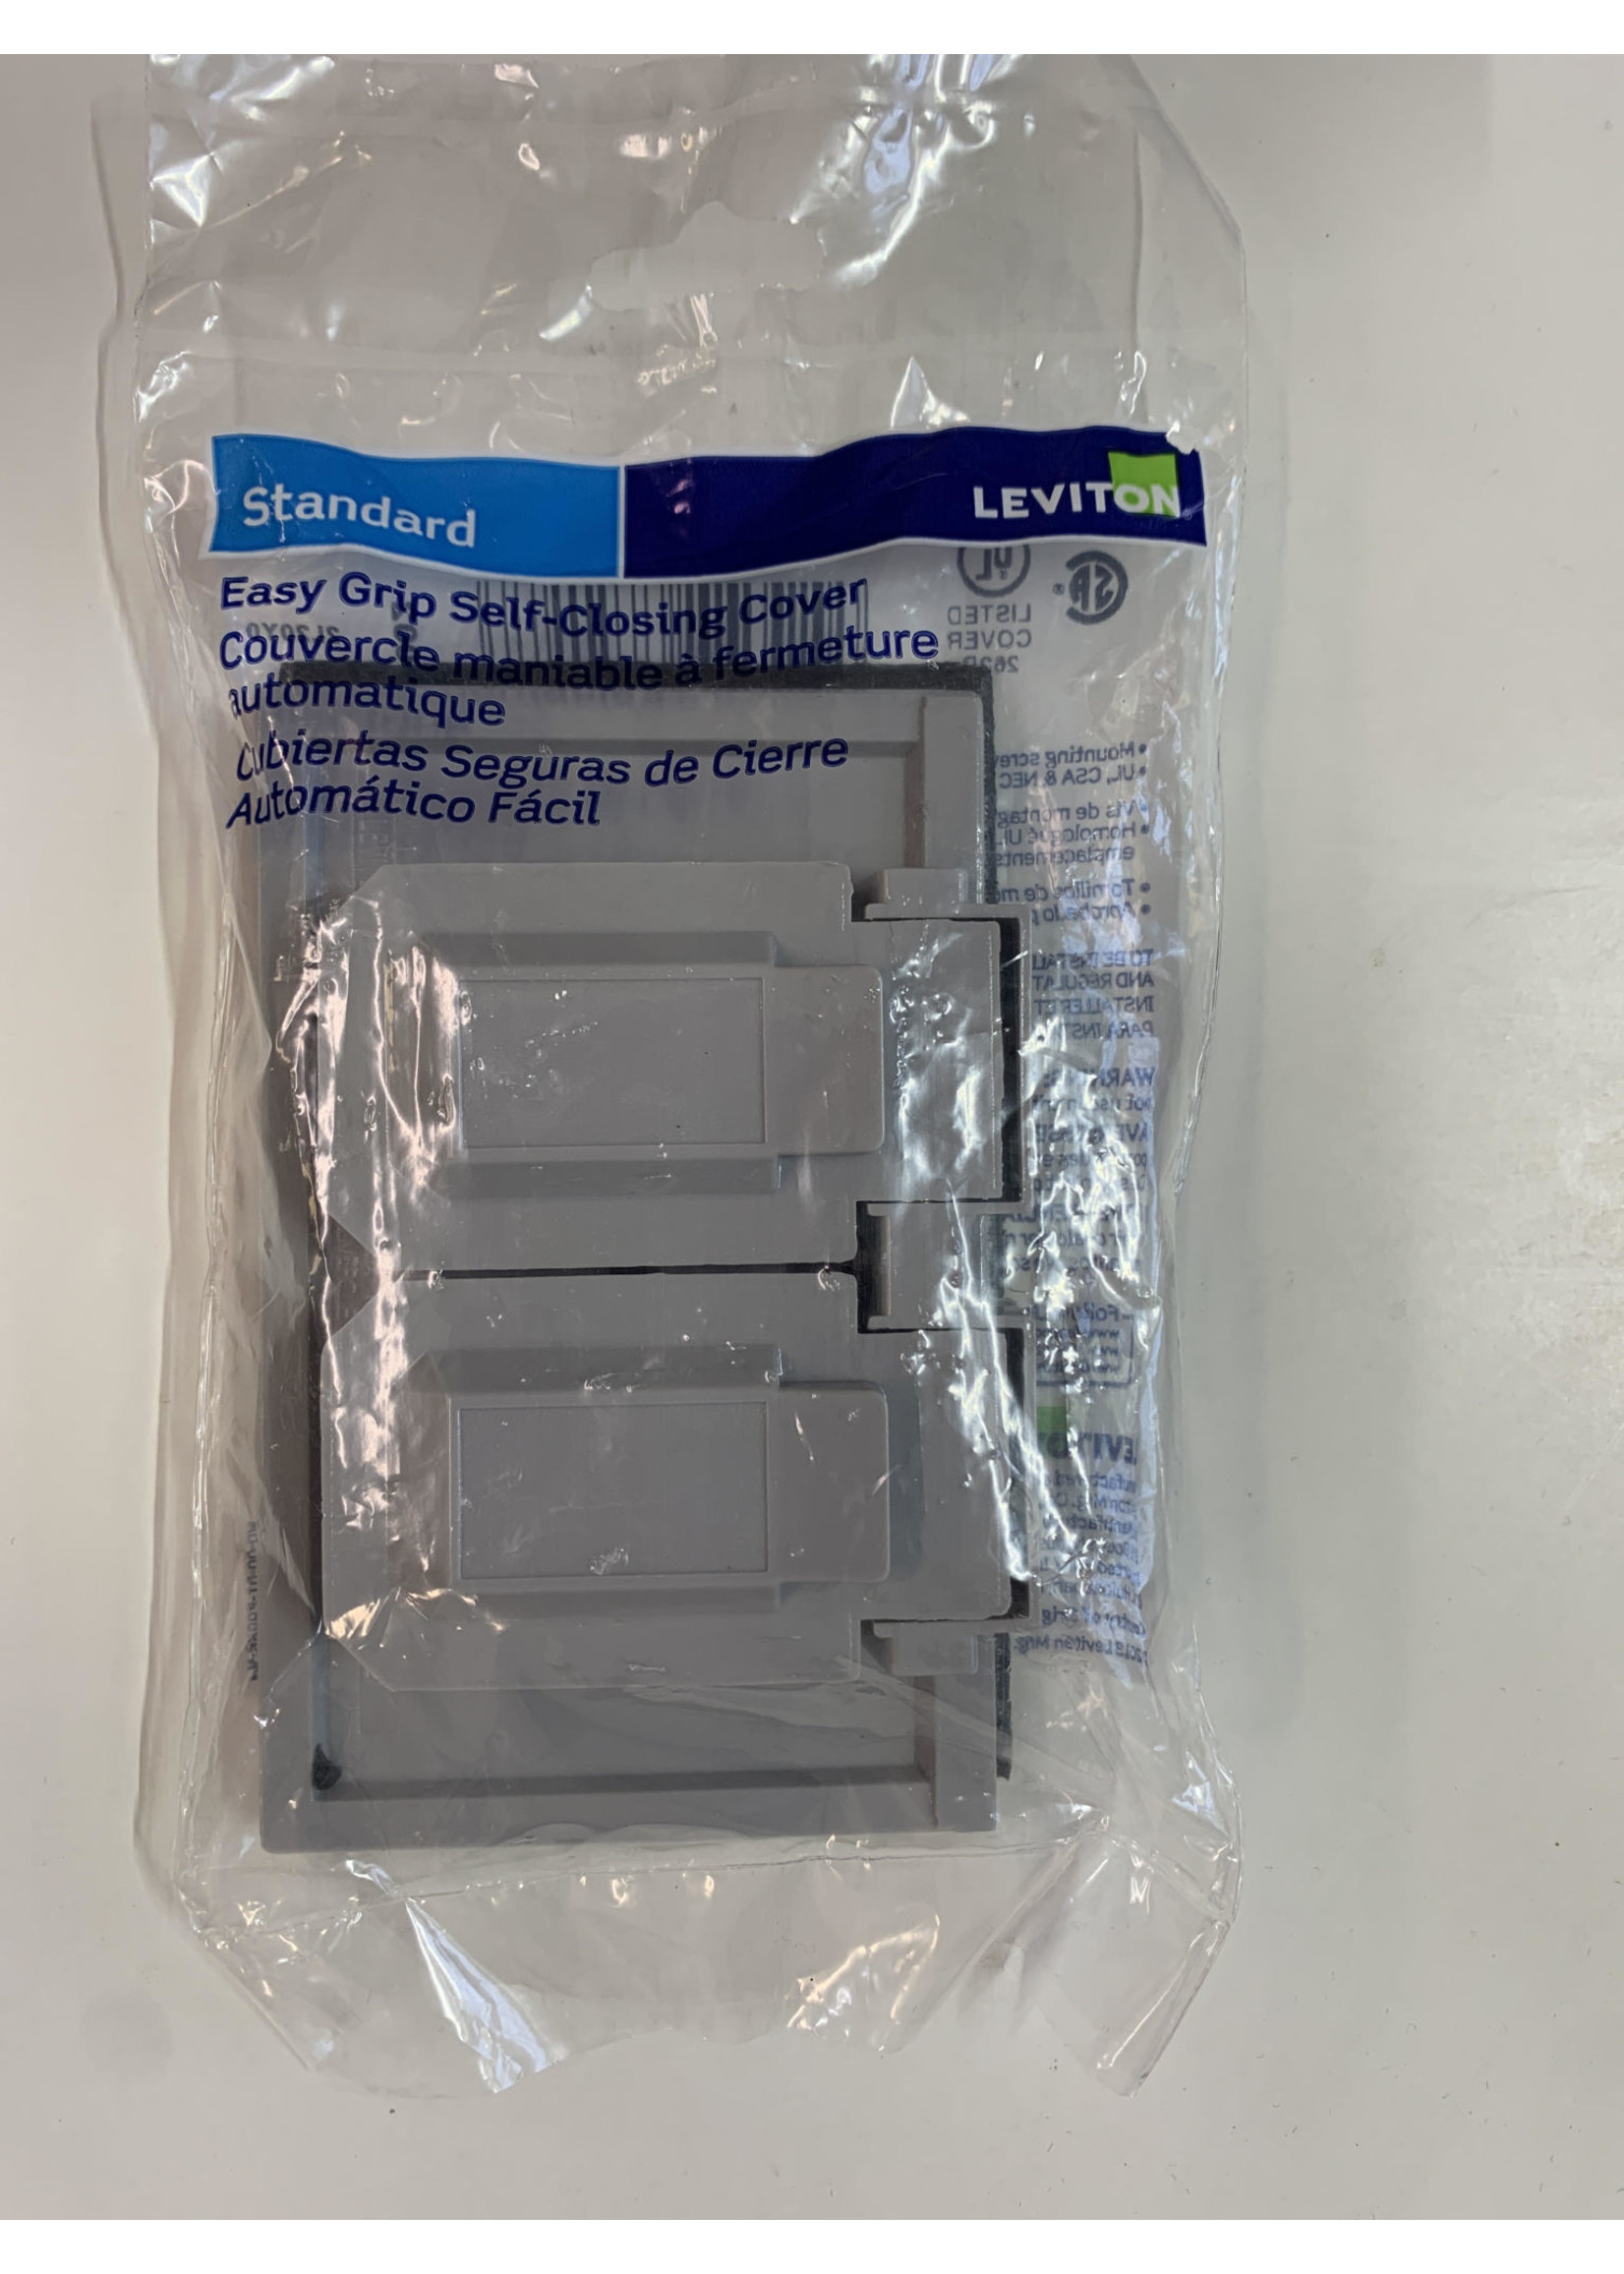 LEVITON COVER/PLATE RECEPTACLE DOUBLE WEATHERPROOF 2X4 (02-08-006)